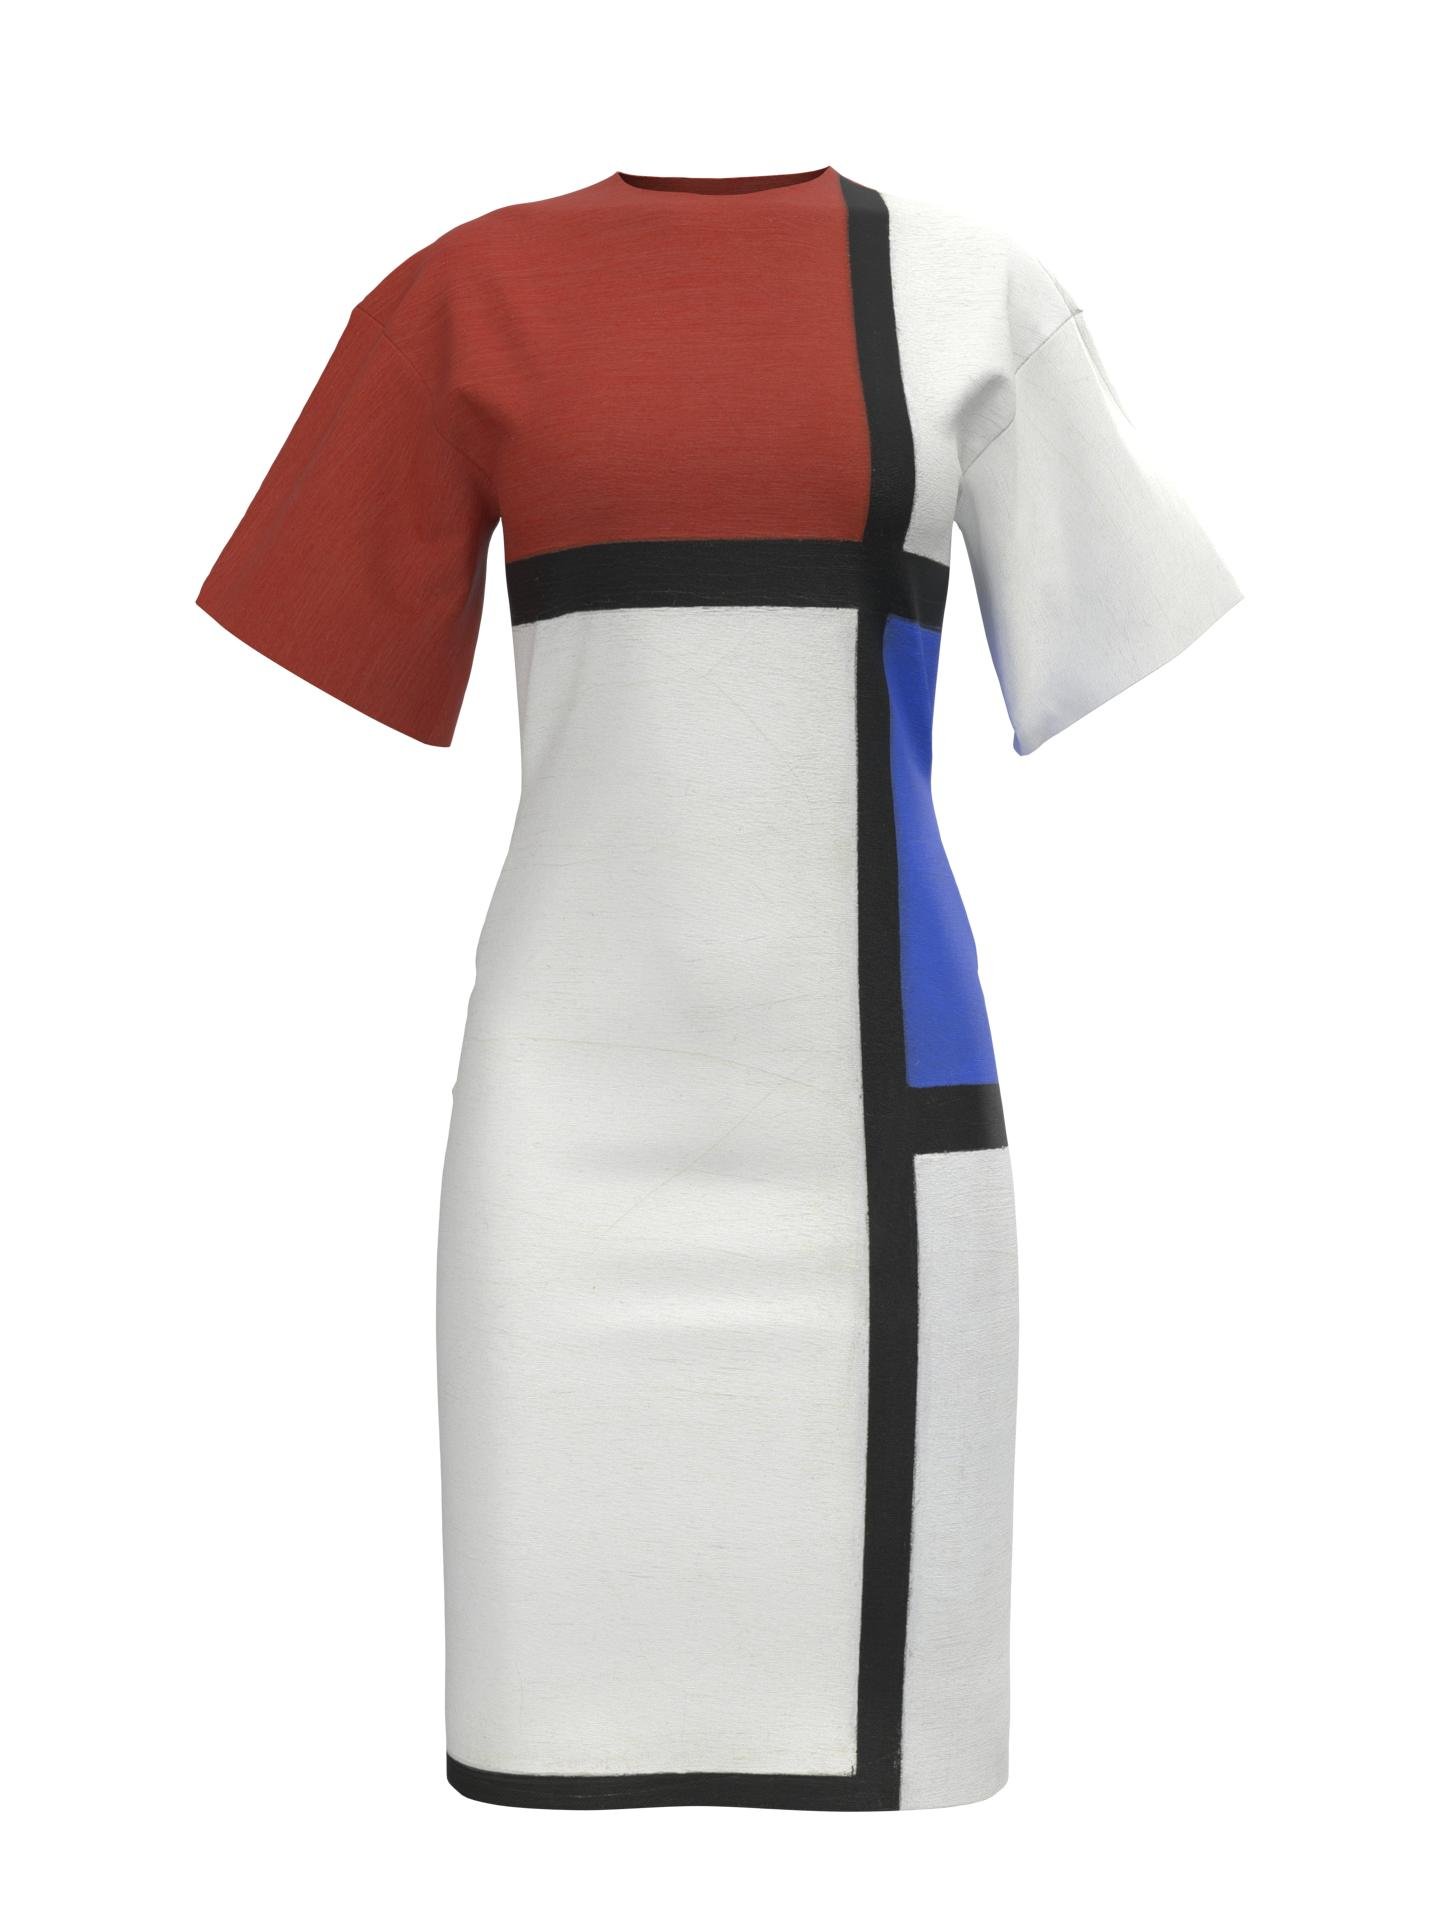 Dress-Composition No. II with Red and Blue by DRESSX